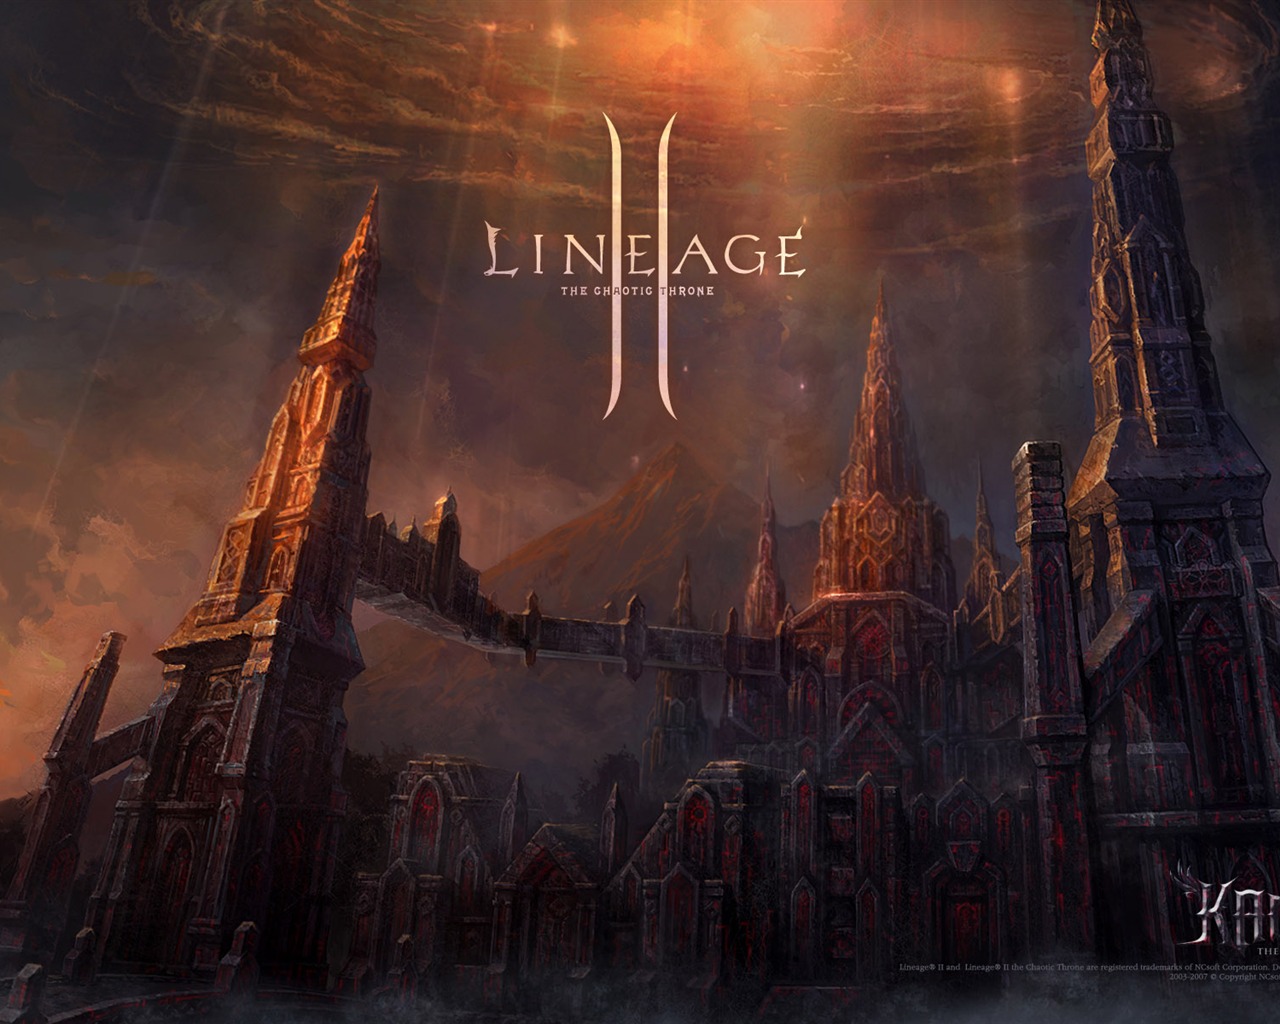 LINEAGE Ⅱ modeling HD gaming wallpapers #4 - 1280x1024